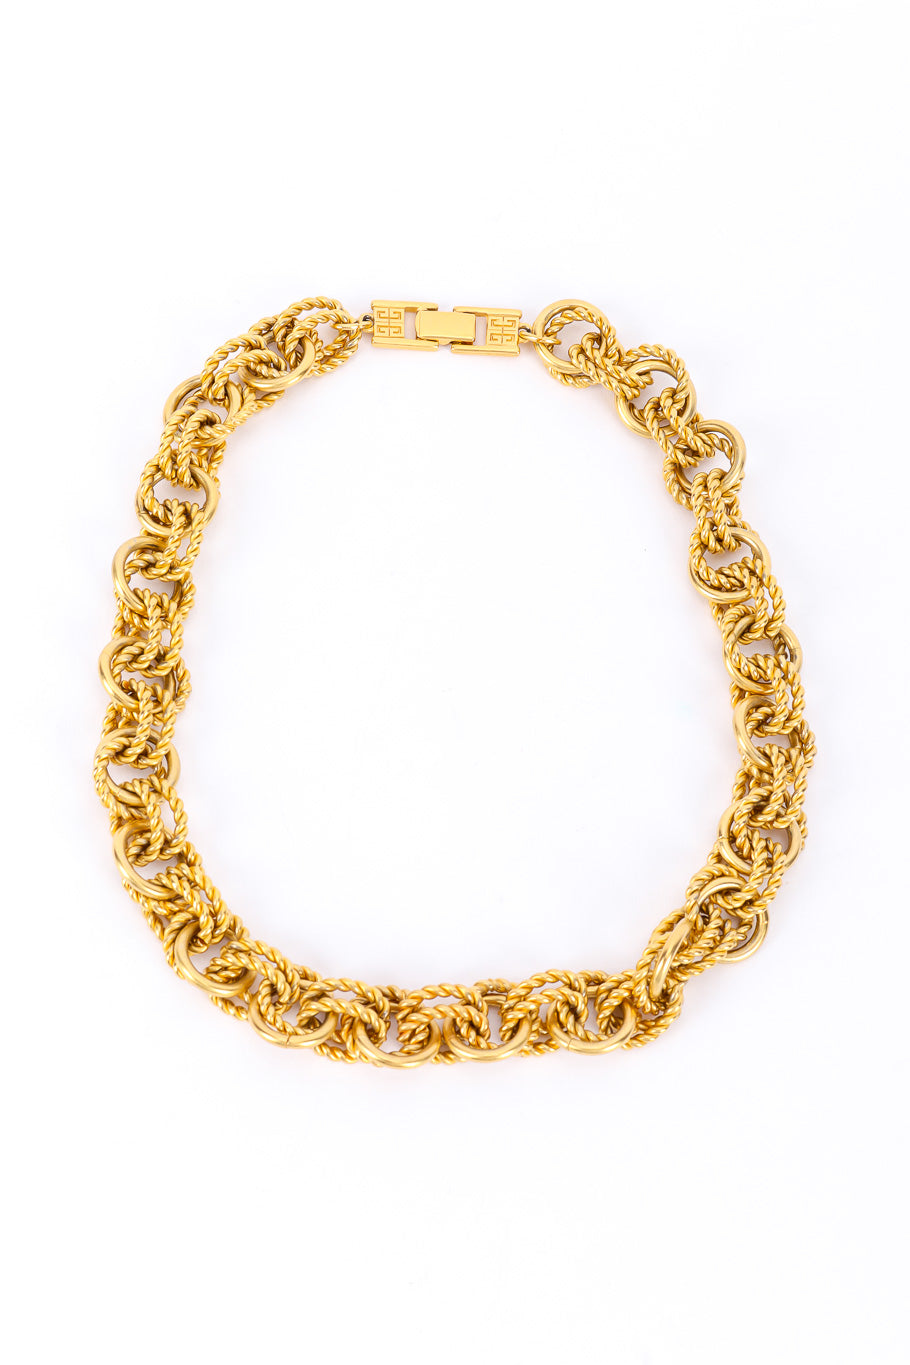 Vintage Givenchy Double Rope Chainlink Necklace full view @Recessla